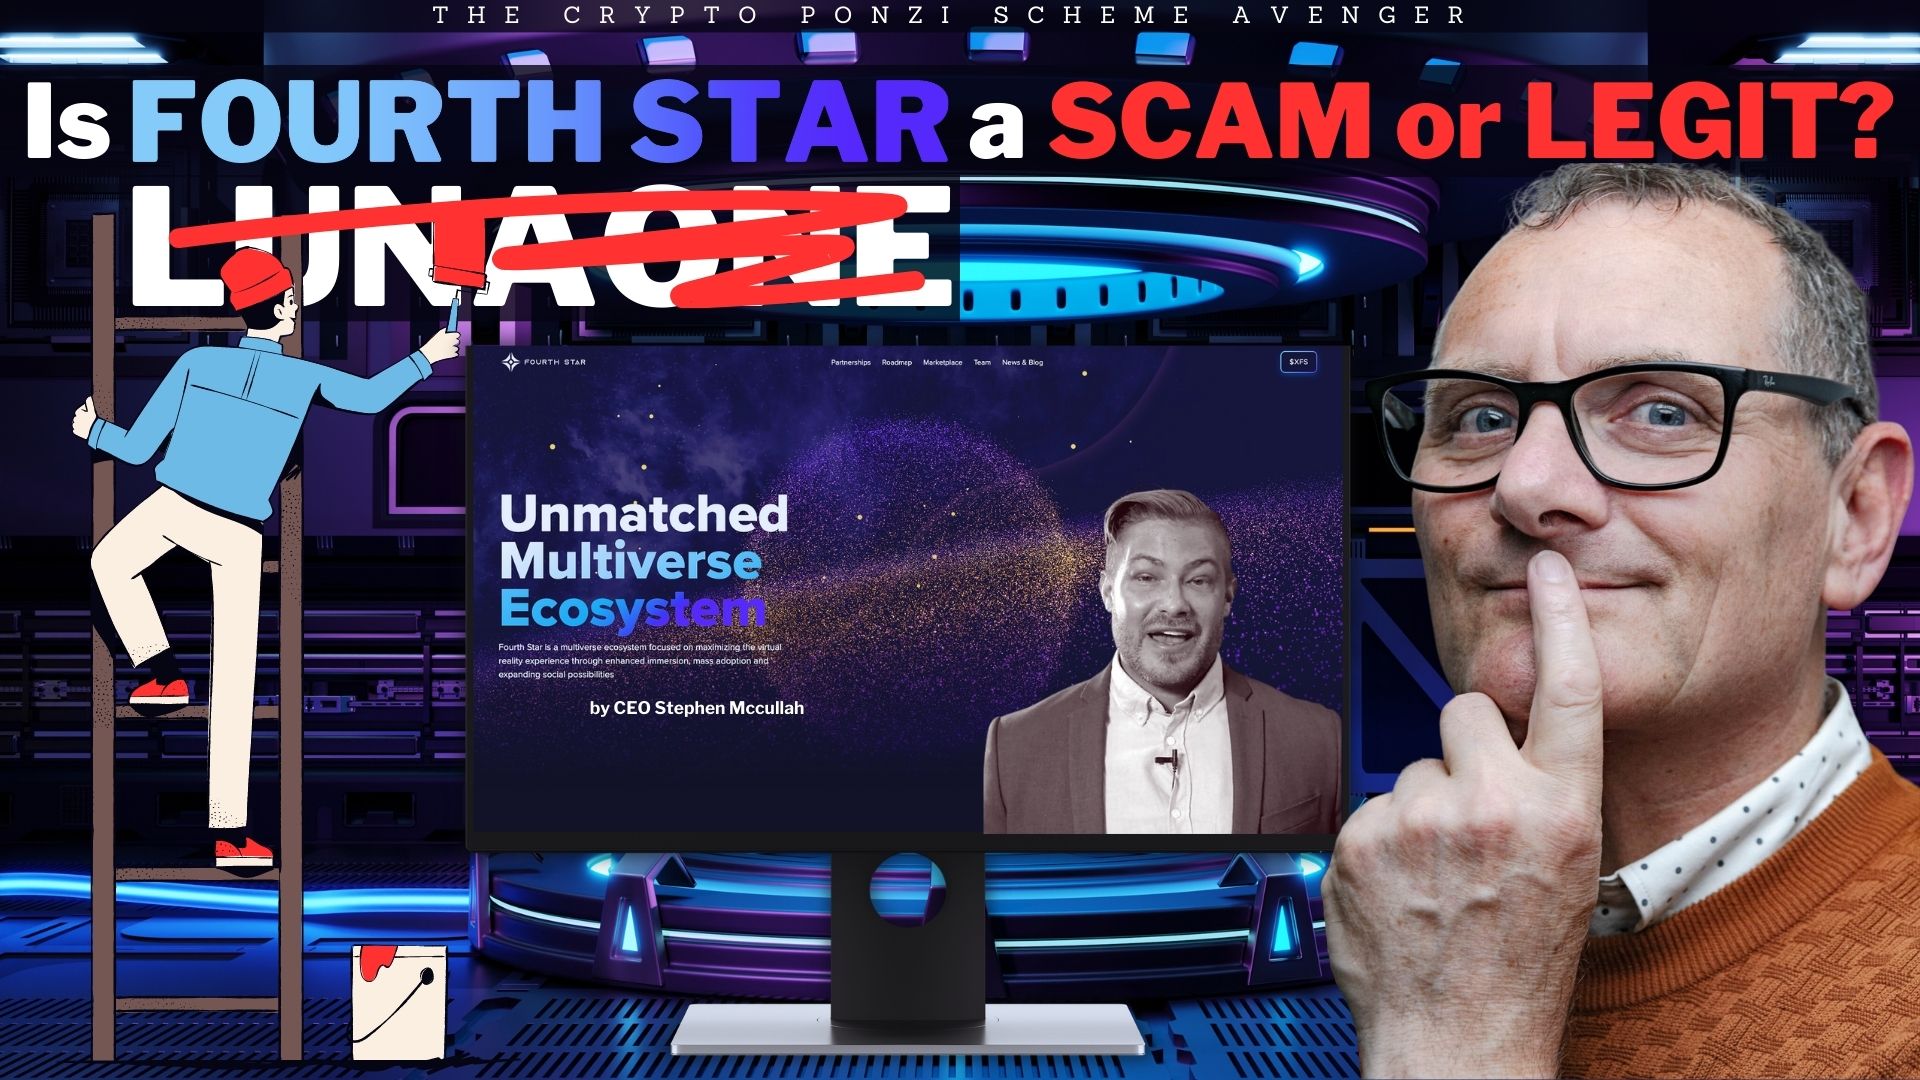 Is FOURTH STAR a SCAM or LEGIT Unmatched Multiverse Ecosystem by Stephen Mccullah Full Review Entrepreneur Decision Maker Connector Podcaster Educator